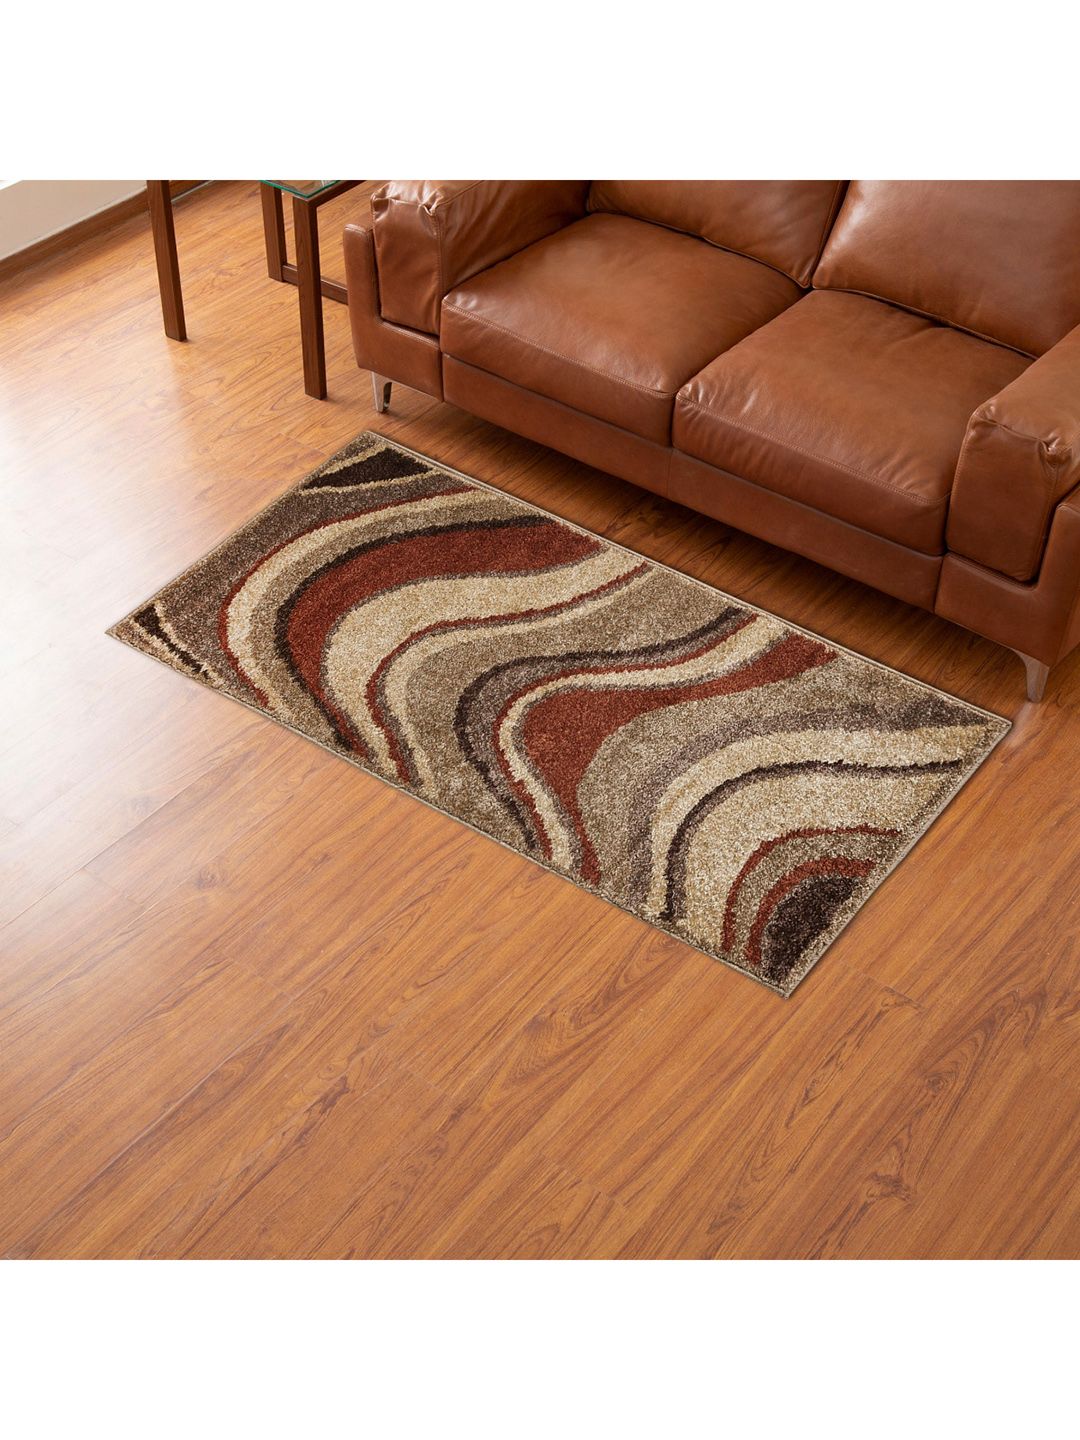 Home Centre Beige & Brown Patterned Anti-Skid Carpet Price in India